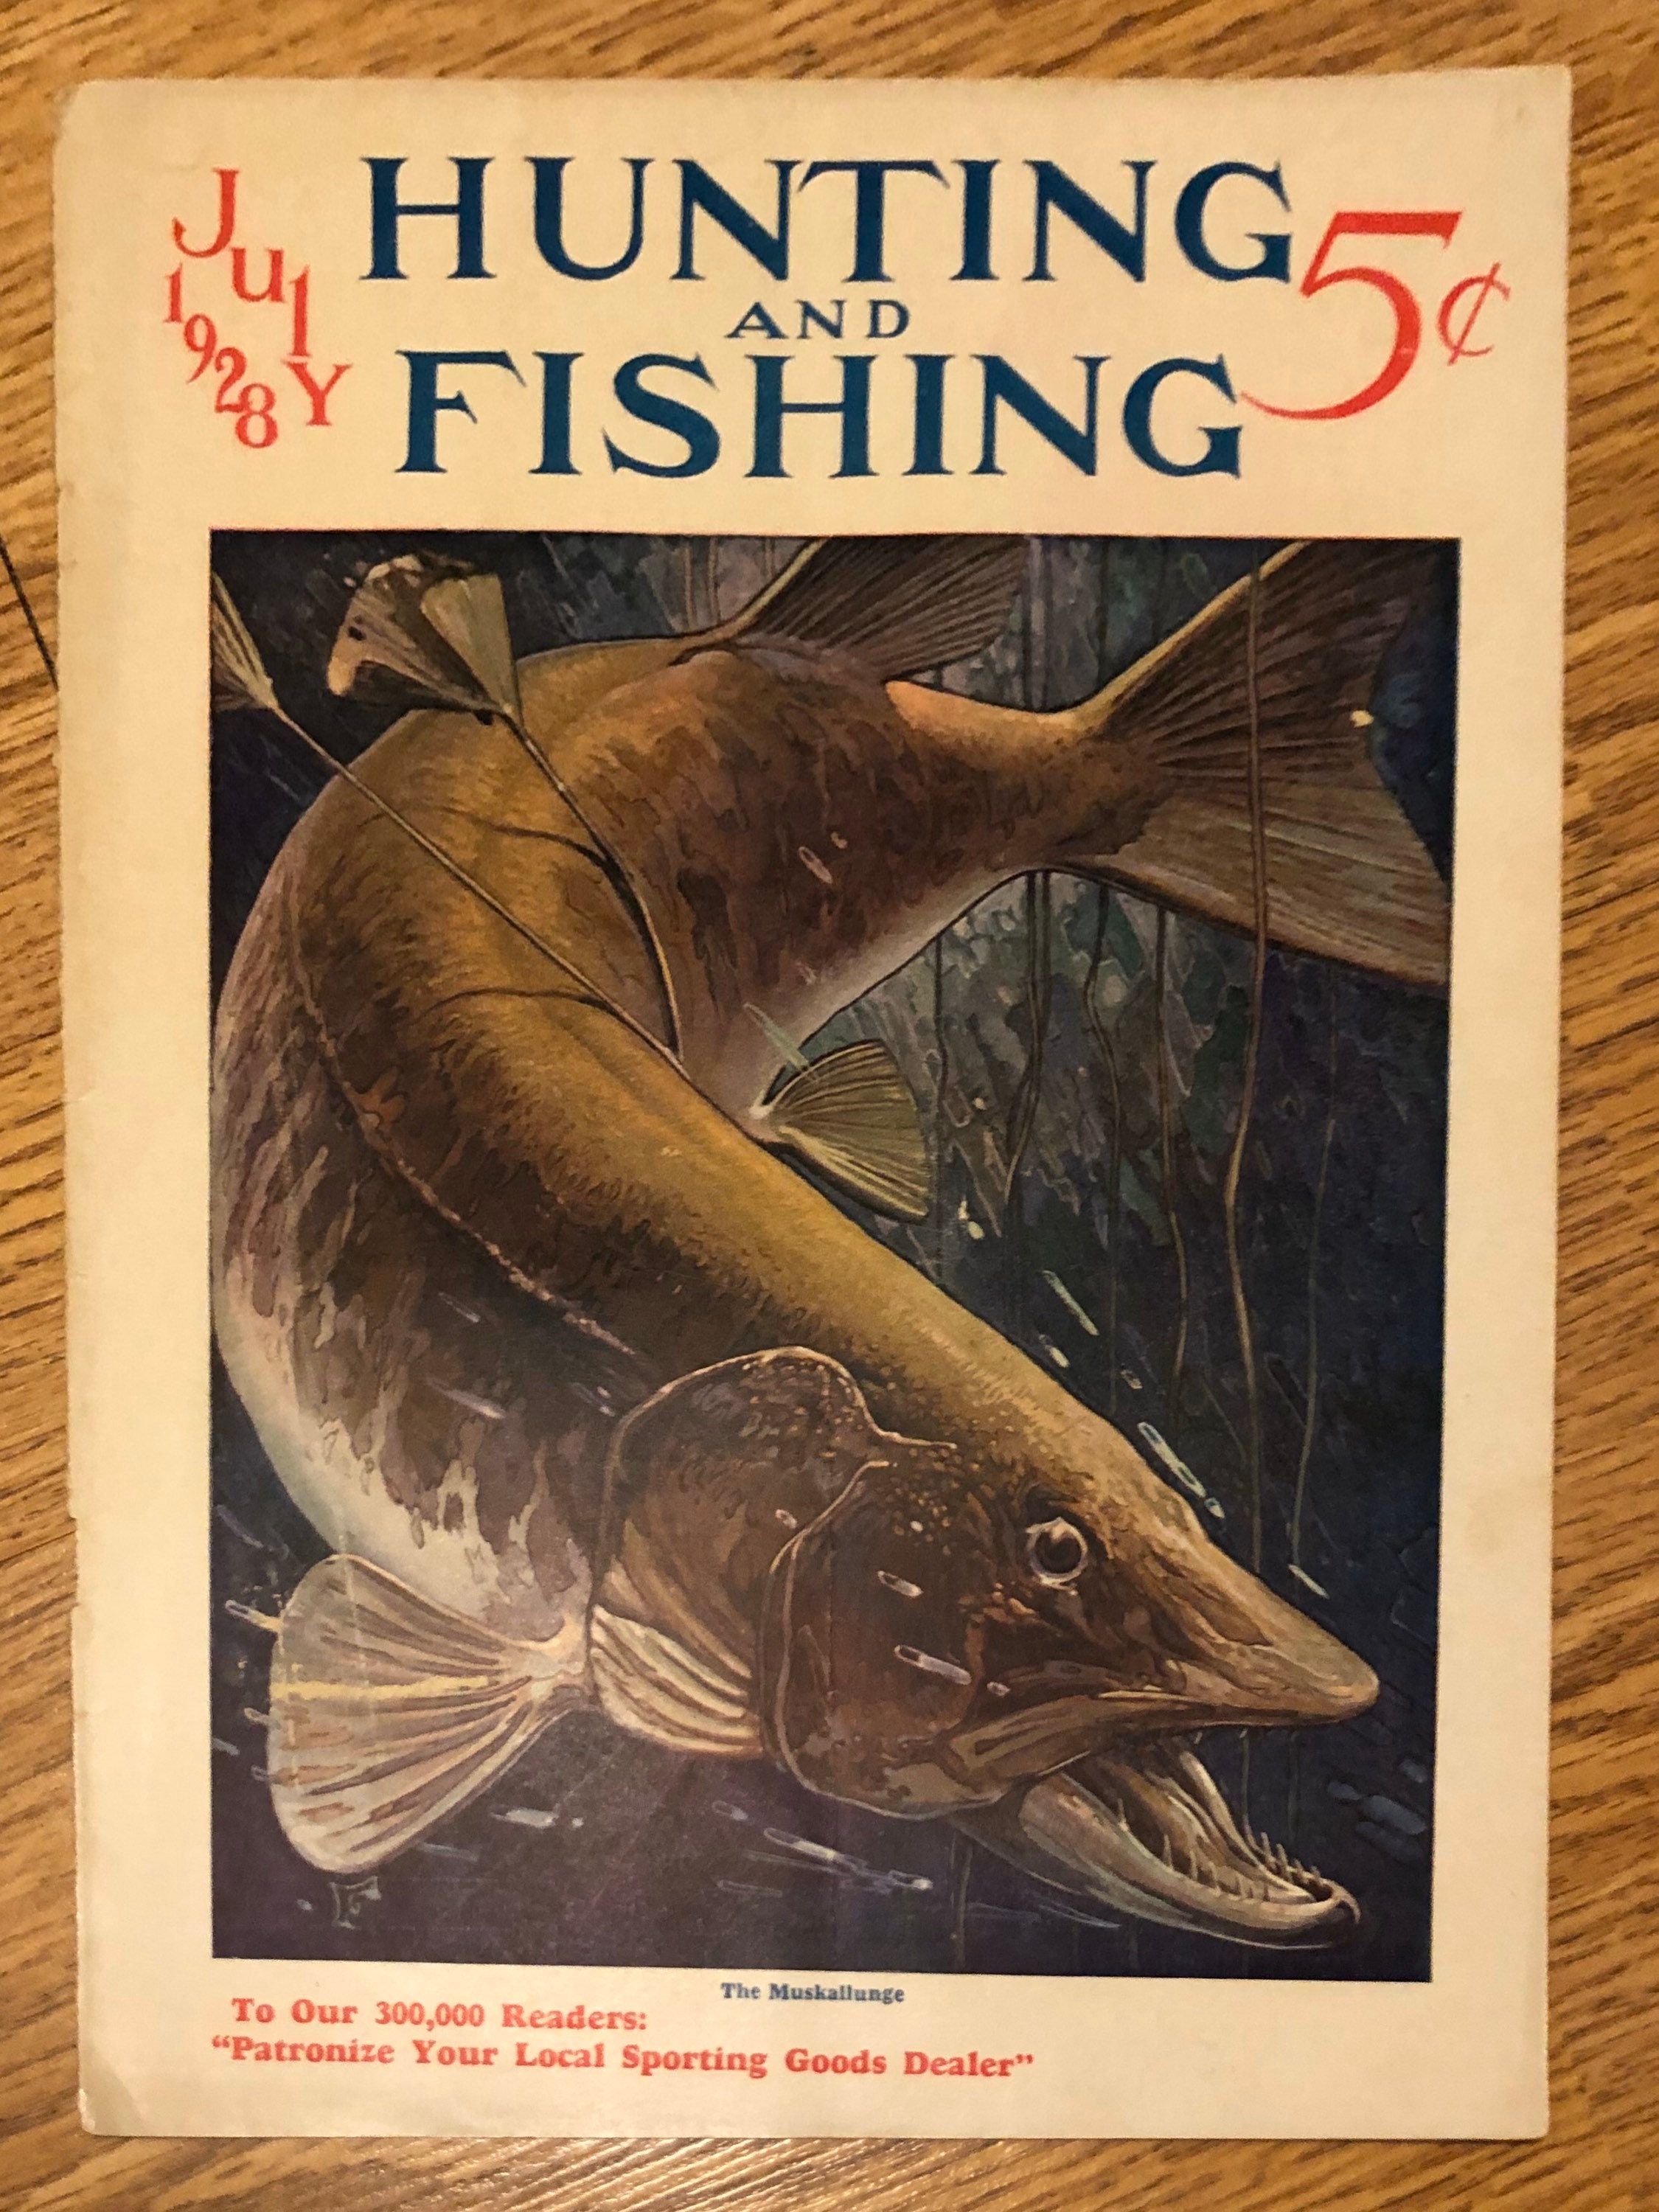 Vintage 1920s Hunting and Fishing Magazine Covers -  India